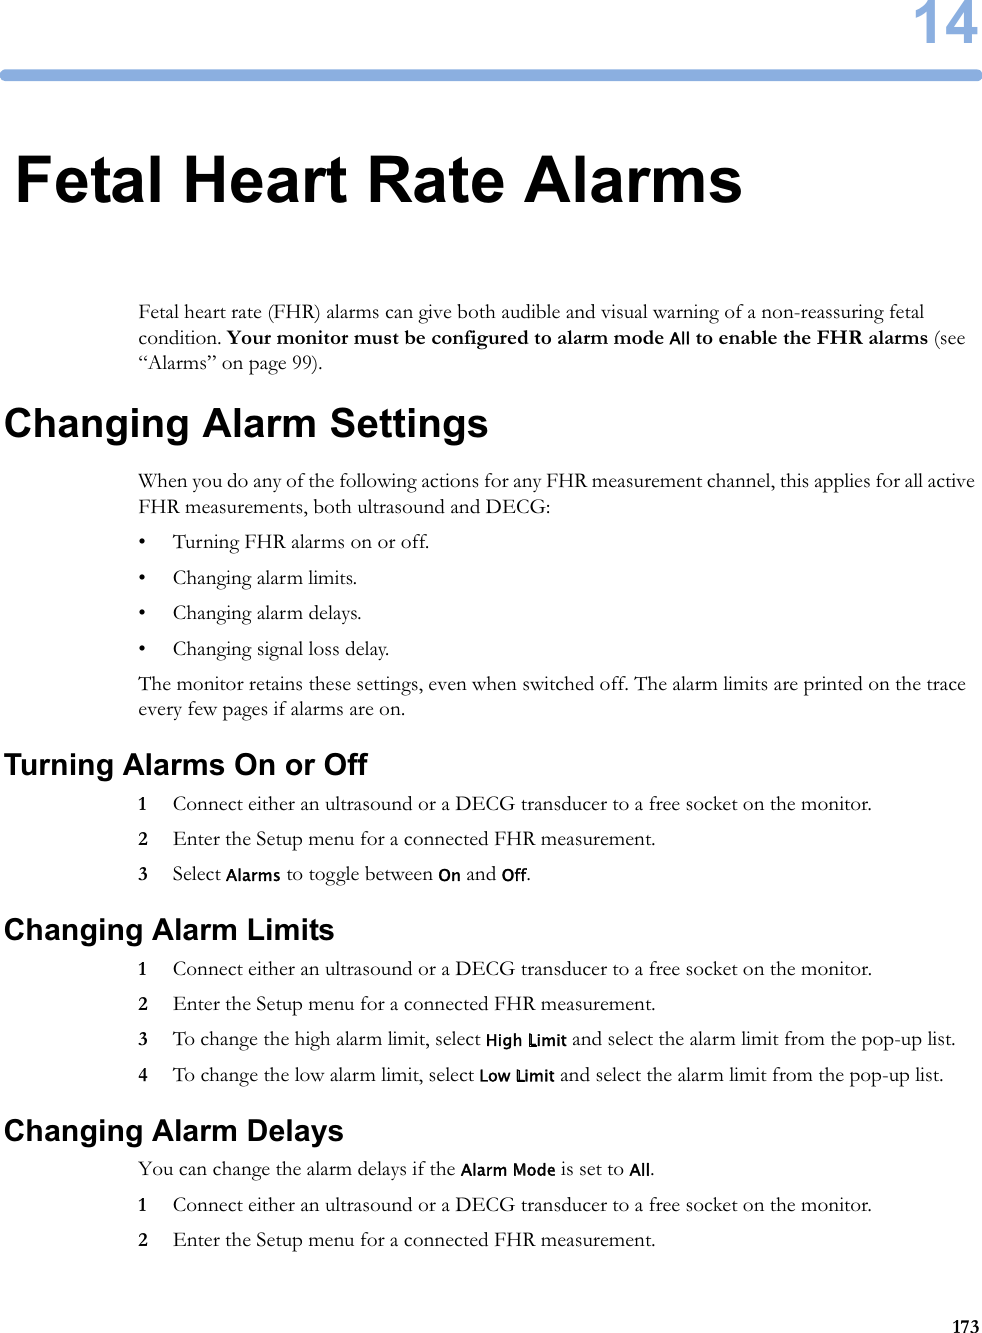 1417314Fetal Heart Rate AlarmsFetal heart rate (FHR) alarms can give both audible and visual warning of a non-reassuring fetal condition. Your monitor must be configured to alarm mode All to enable the FHR alarms (see “Alarms” on page 99).Changing Alarm SettingsWhen you do any of the following actions for any FHR measurement channel, this applies for all active FHR measurements, both ultrasound and DECG:• Turning FHR alarms on or off.• Changing alarm limits.• Changing alarm delays.• Changing signal loss delay.The monitor retains these settings, even when switched off. The alarm limits are printed on the trace every few pages if alarms are on.Turning Alarms On or Off1Connect either an ultrasound or a DECG transducer to a free socket on the monitor.2Enter the Setup menu for a connected FHR measurement.3Select Alarms to toggle between On and Off.Changing Alarm Limits1Connect either an ultrasound or a DECG transducer to a free socket on the monitor.2Enter the Setup menu for a connected FHR measurement.3To change the high alarm limit, select High Limit and select the alarm limit from the pop-up list.4To change the low alarm limit, select Low Limit and select the alarm limit from the pop-up list.Changing Alarm DelaysYou can change the alarm delays if the Alarm Mode is set to All.1Connect either an ultrasound or a DECG transducer to a free socket on the monitor.2Enter the Setup menu for a connected FHR measurement.